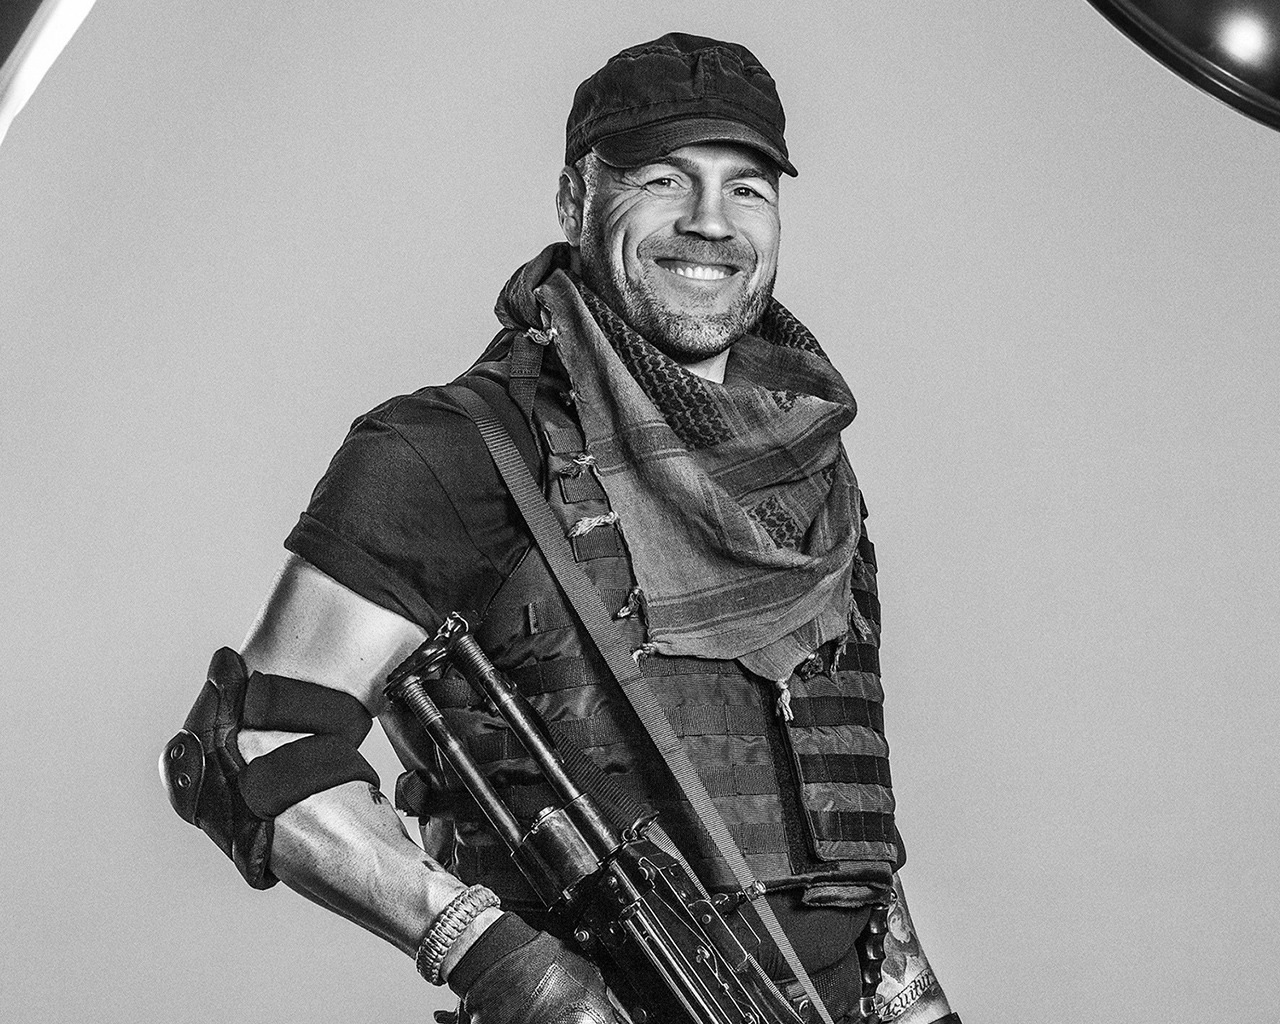 Randy Couture The Expendables 3 for 1280 x 1024 resolution